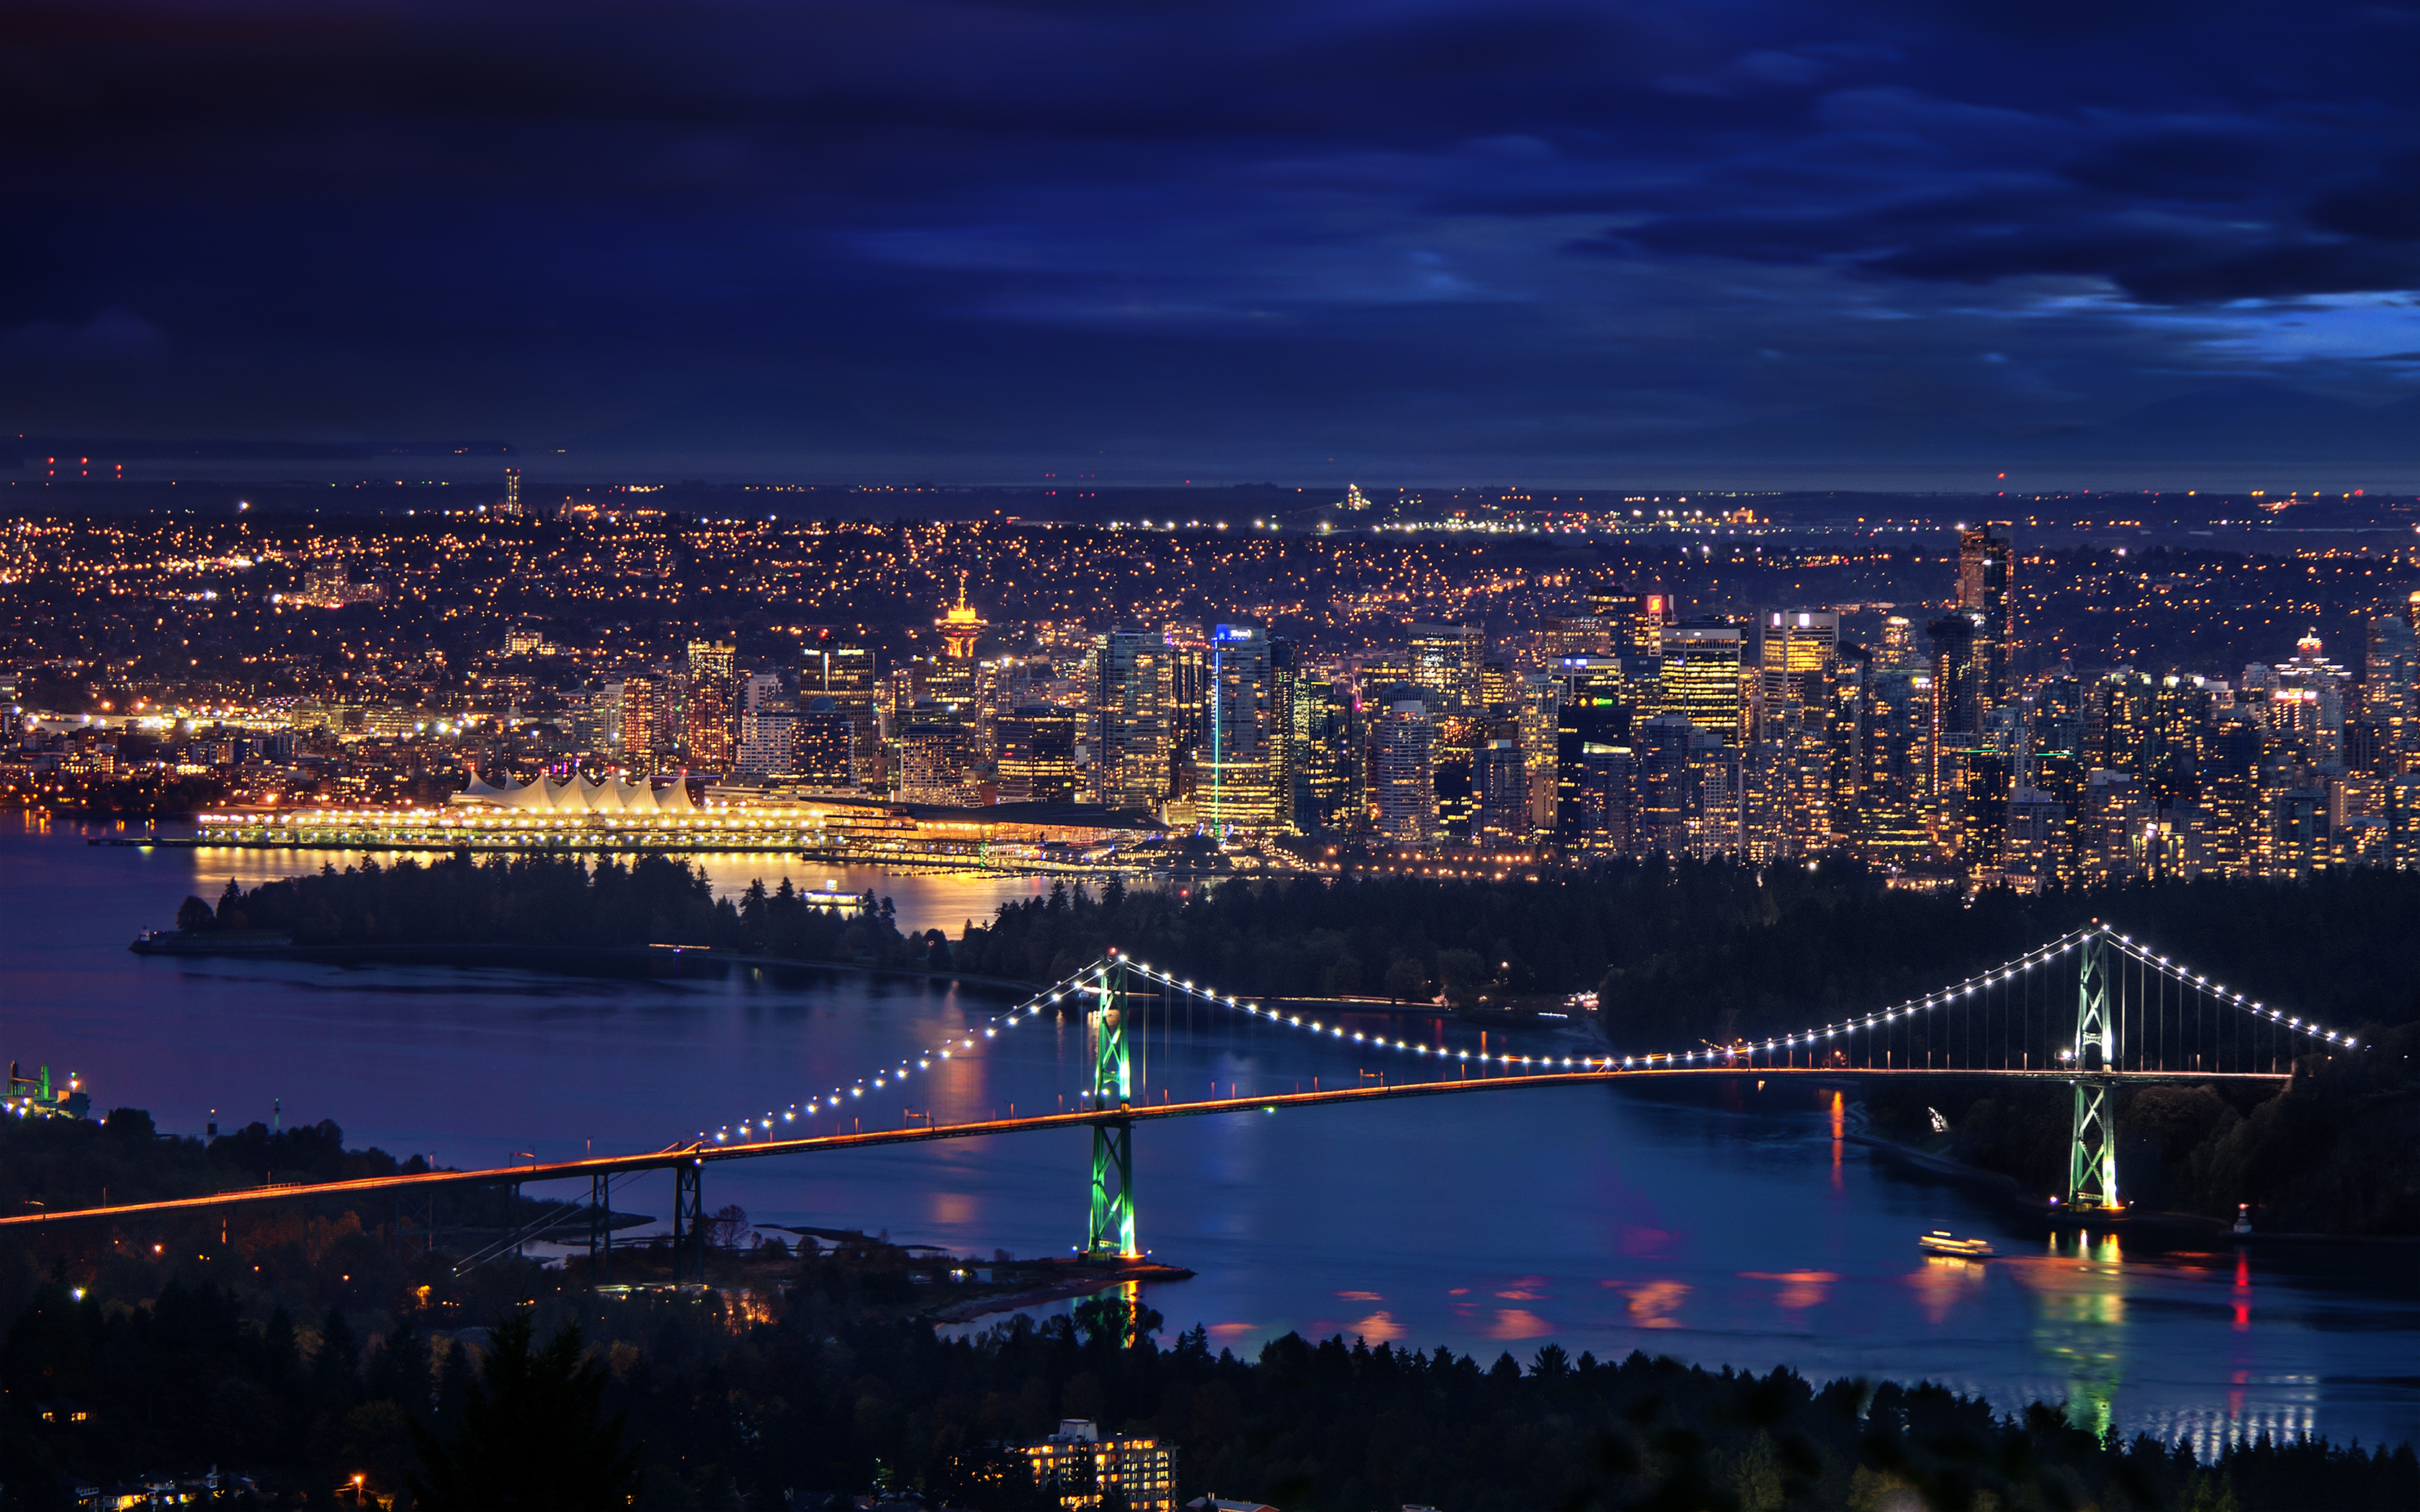 Image Vancouver Canada Downtown Bridges Night Time Cities